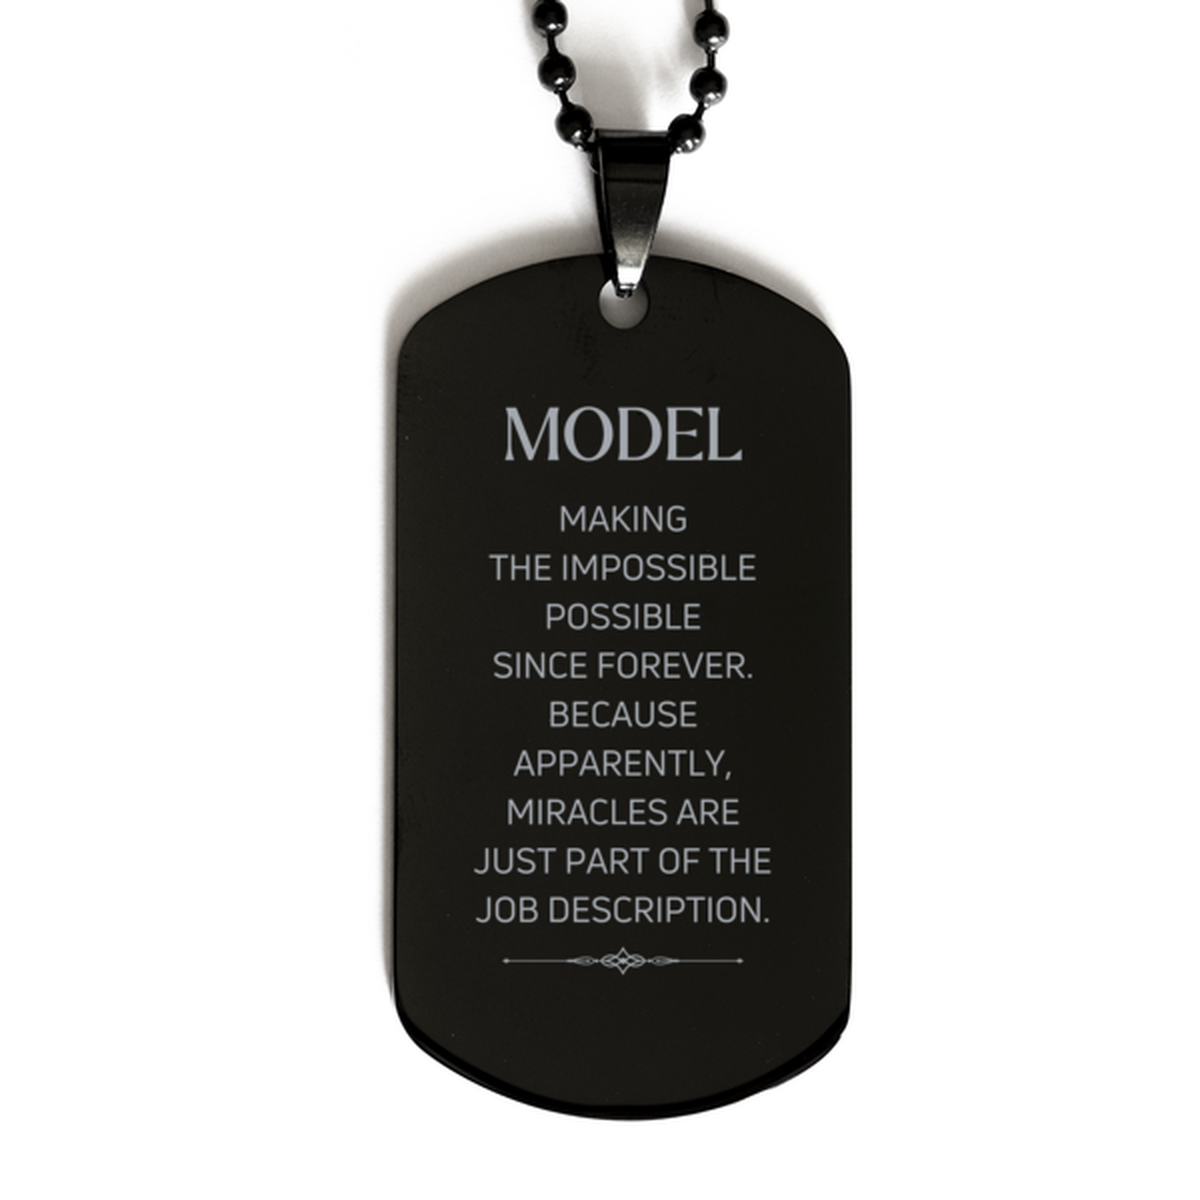 Funny Model Gifts, Miracles are just part of the job description, Inspirational Birthday Black Dog Tag For Model, Men, Women, Coworkers, Friends, Boss